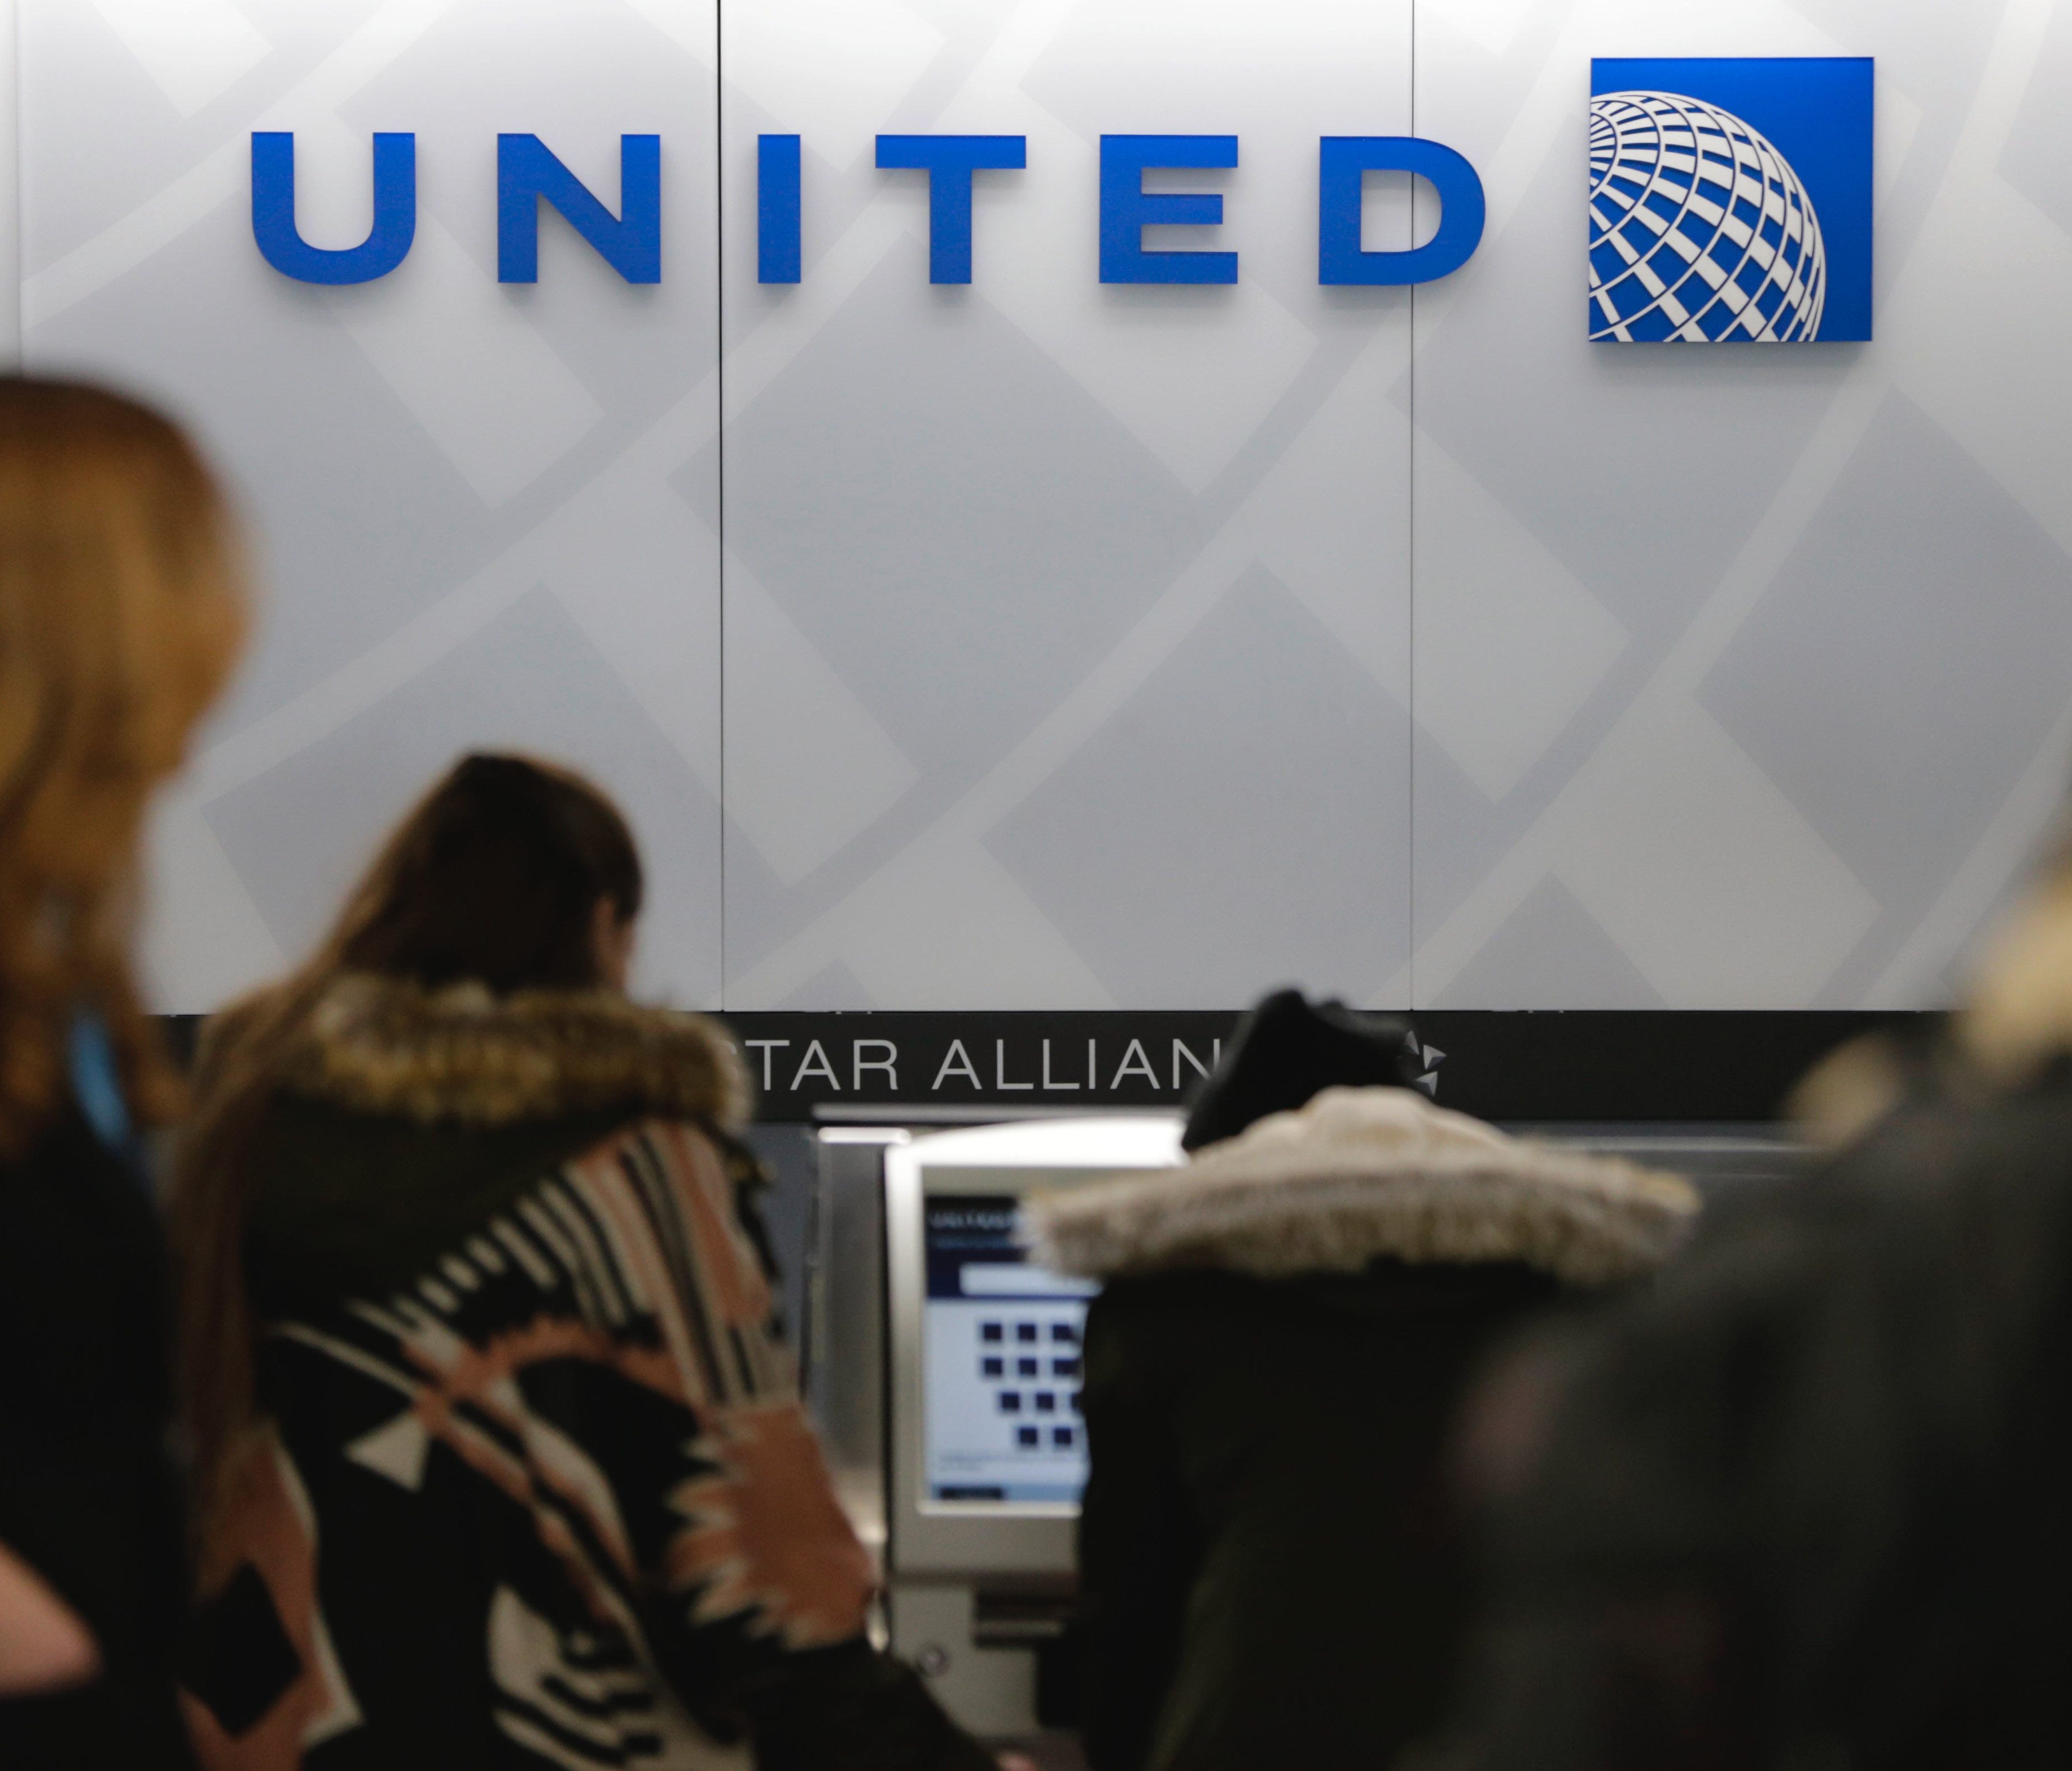 A United Airlines counter is pictured at New York's LaGuardia Airport.